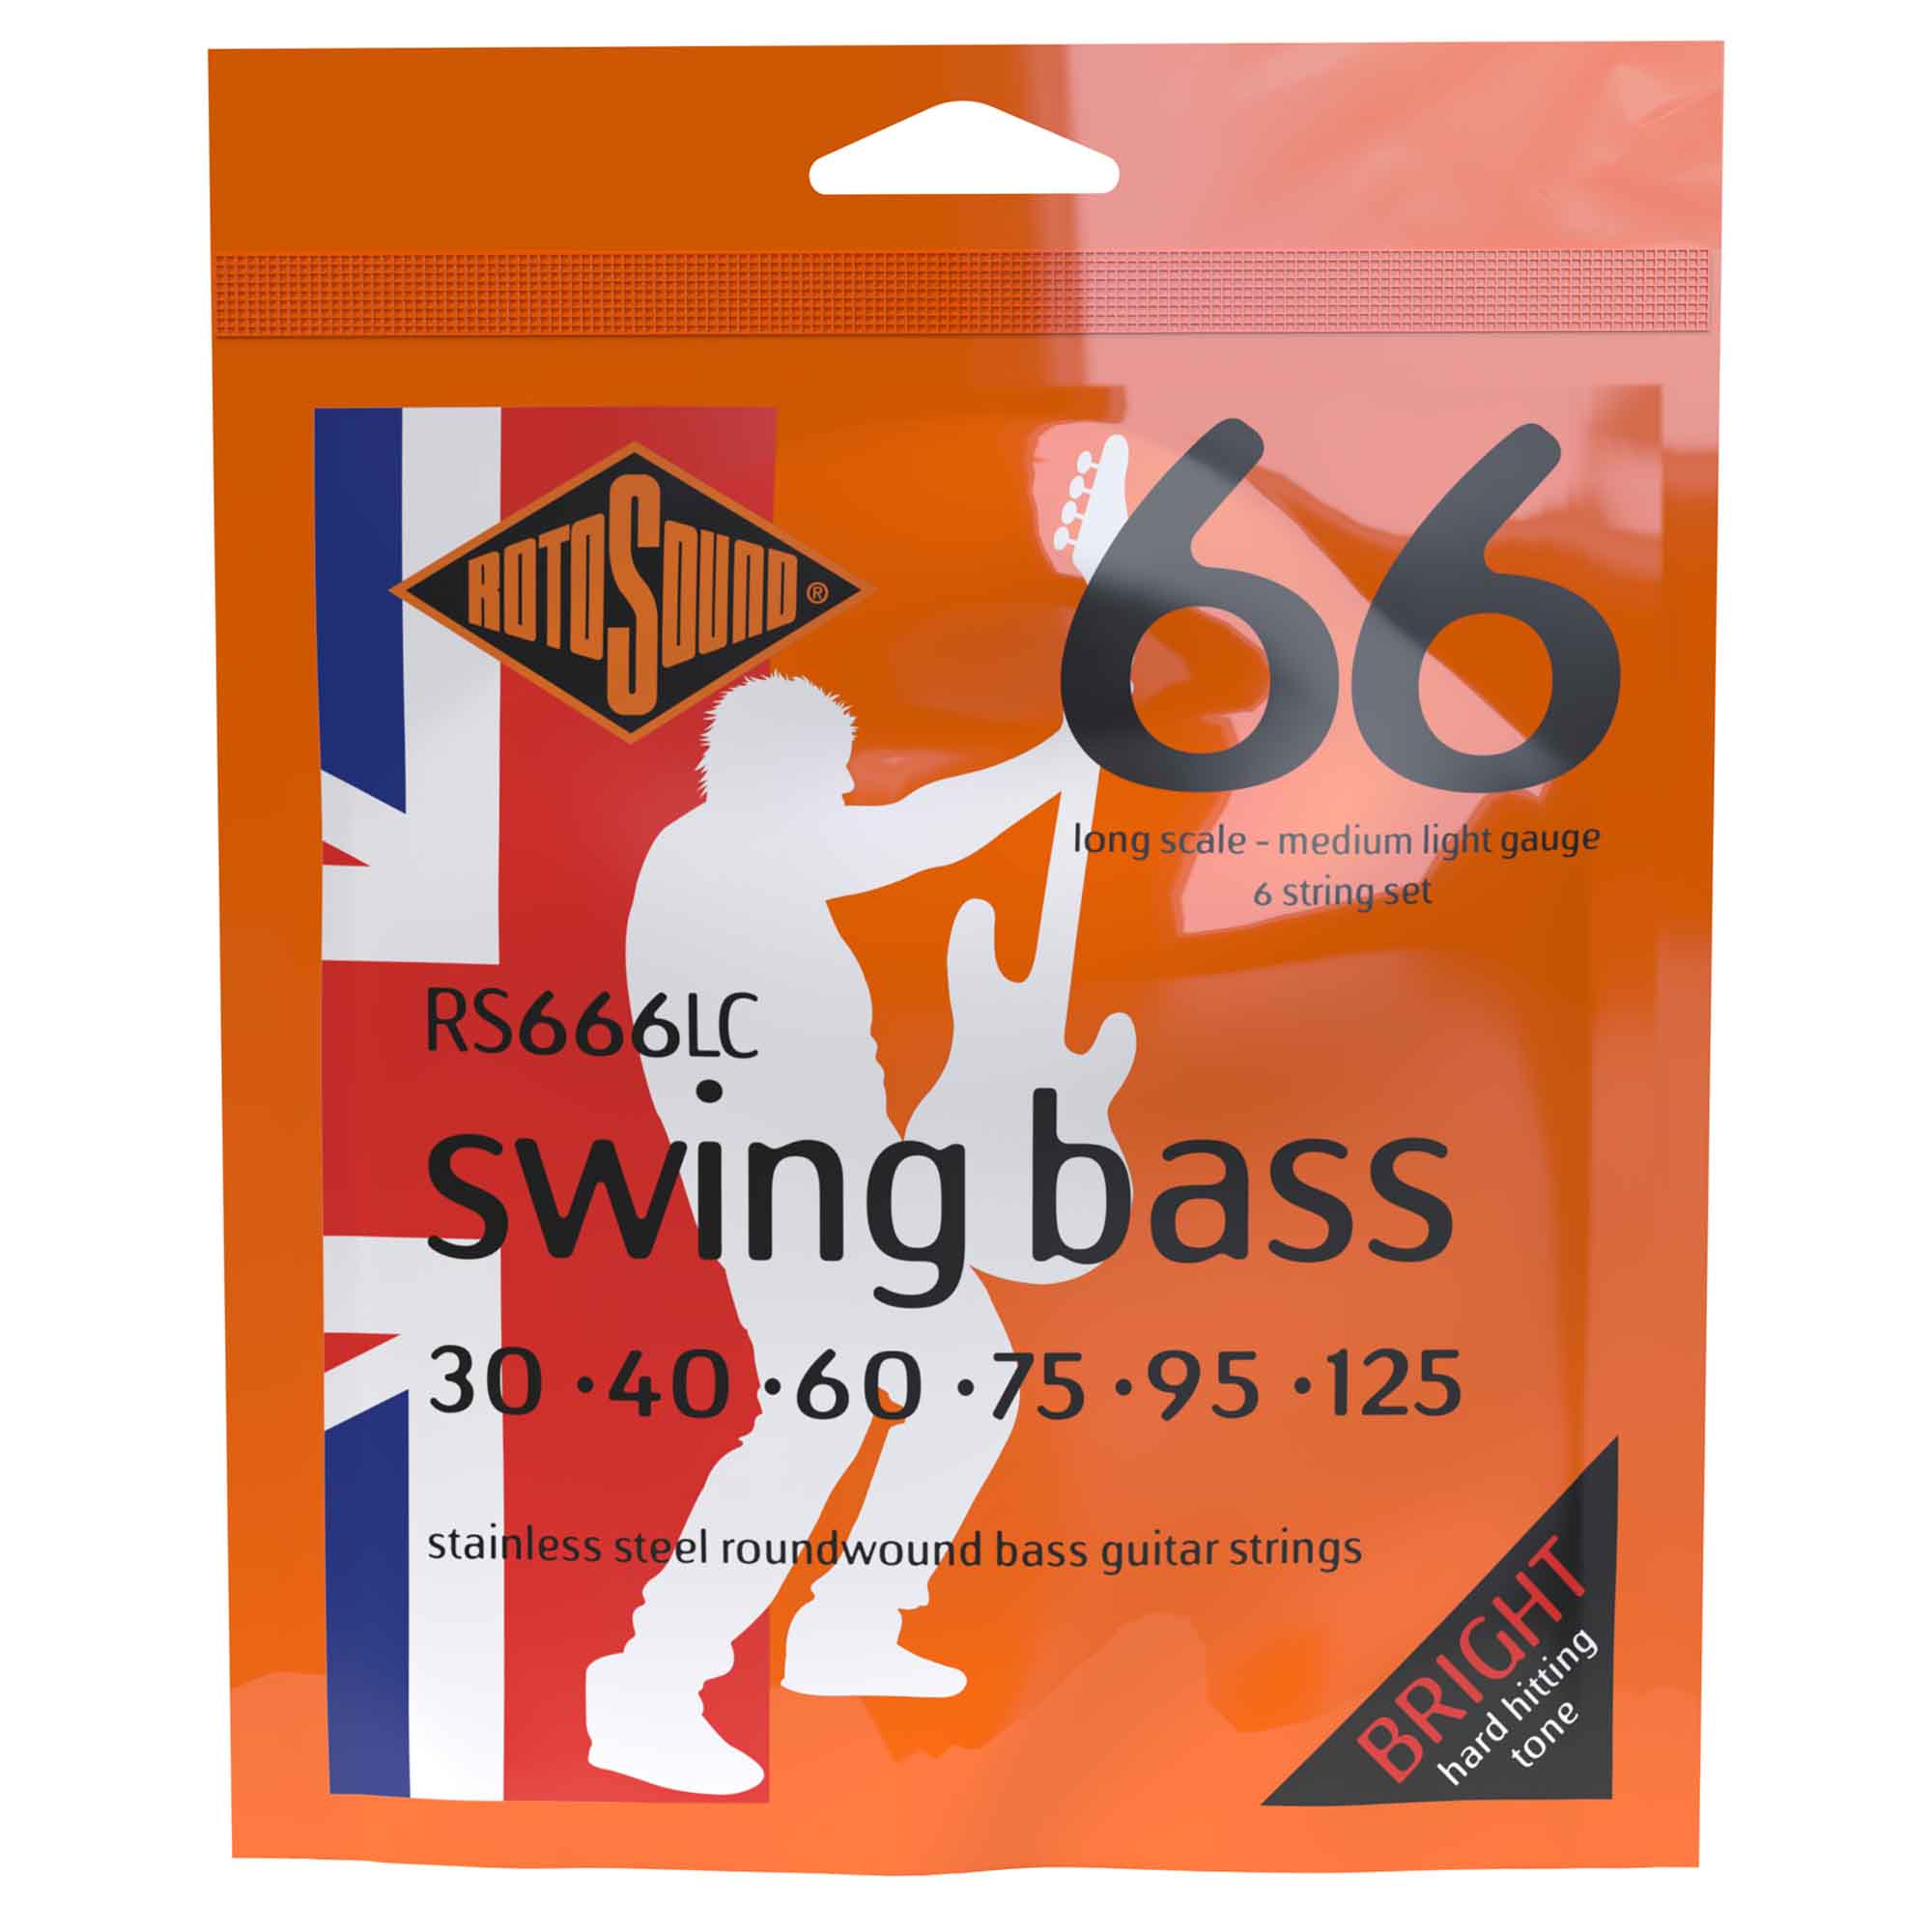 Rotosound RS666LC Swing Bass Stainless Steel Roundwound Bass Guitar Strings 30-125 6-String Long Scale